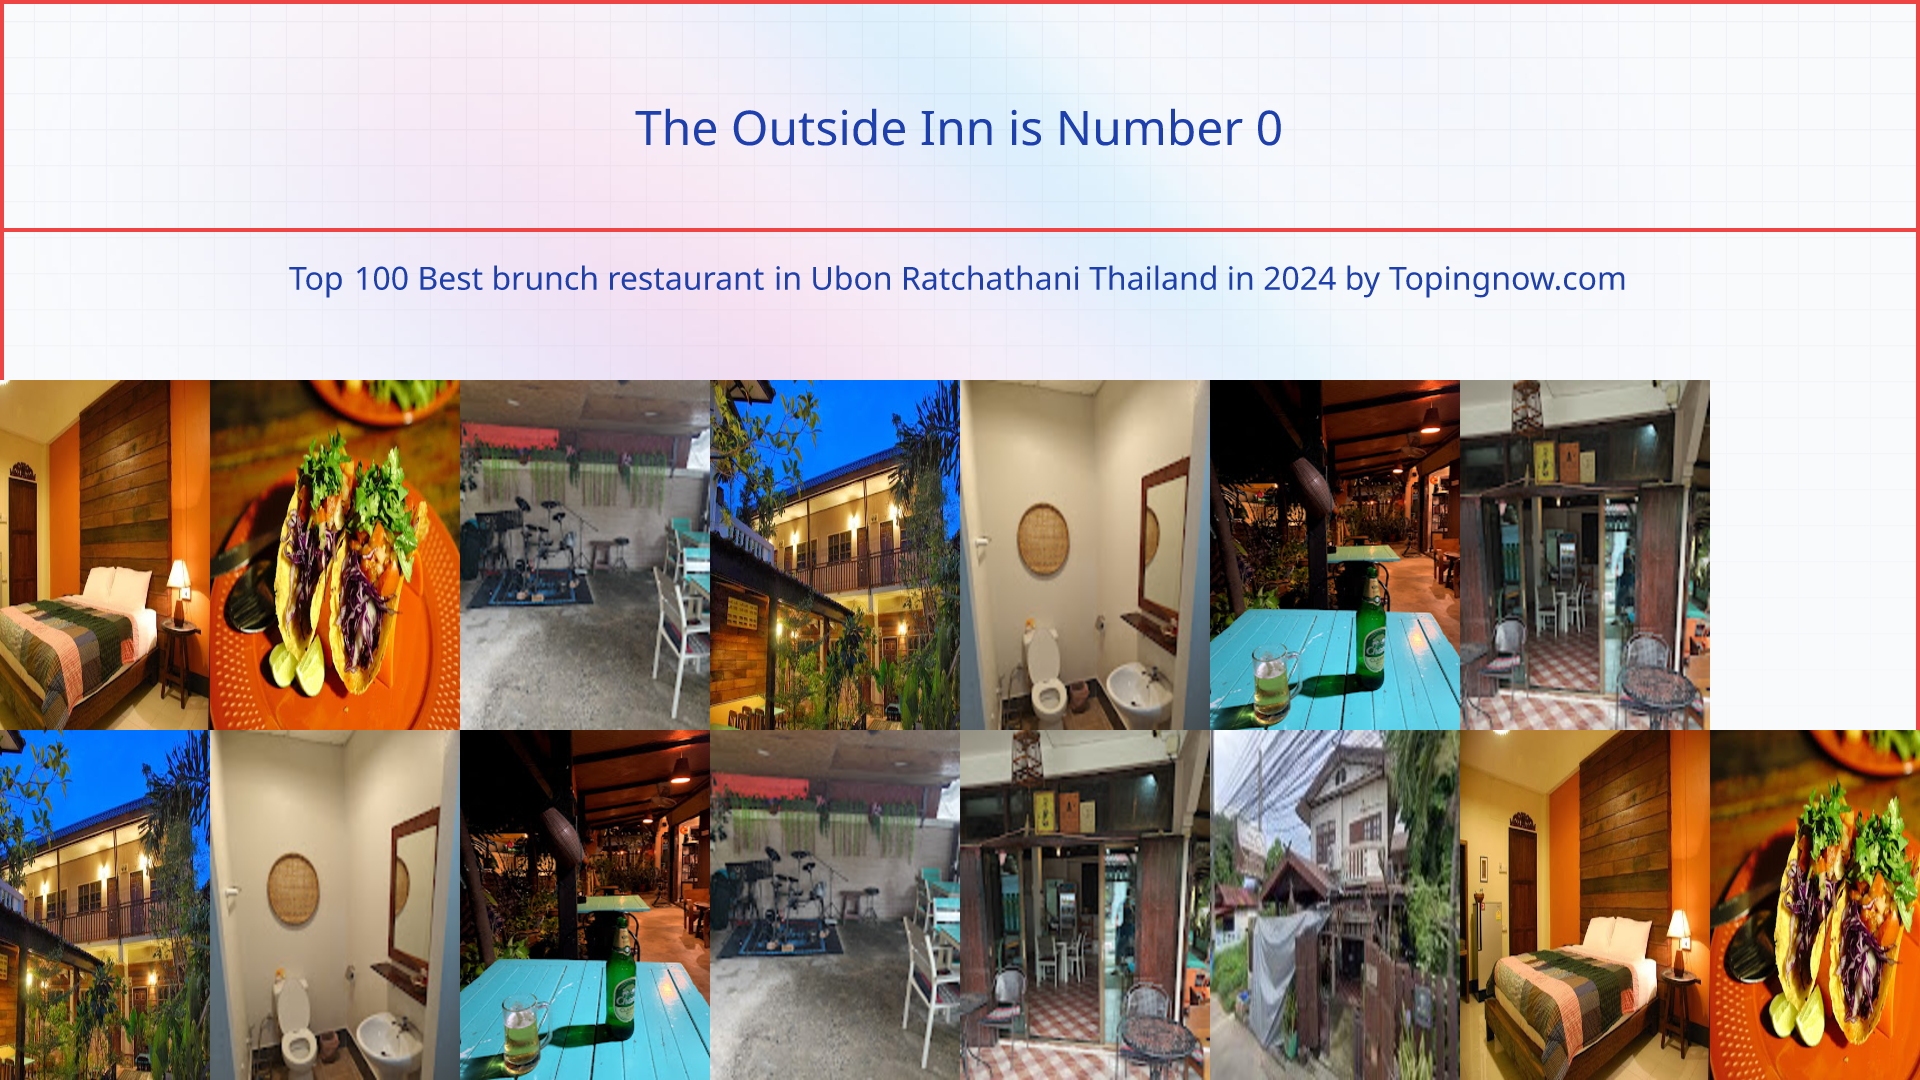 The Outside Inn: Top 100 Best brunch restaurant in Ubon Ratchathani Thailand in 2024